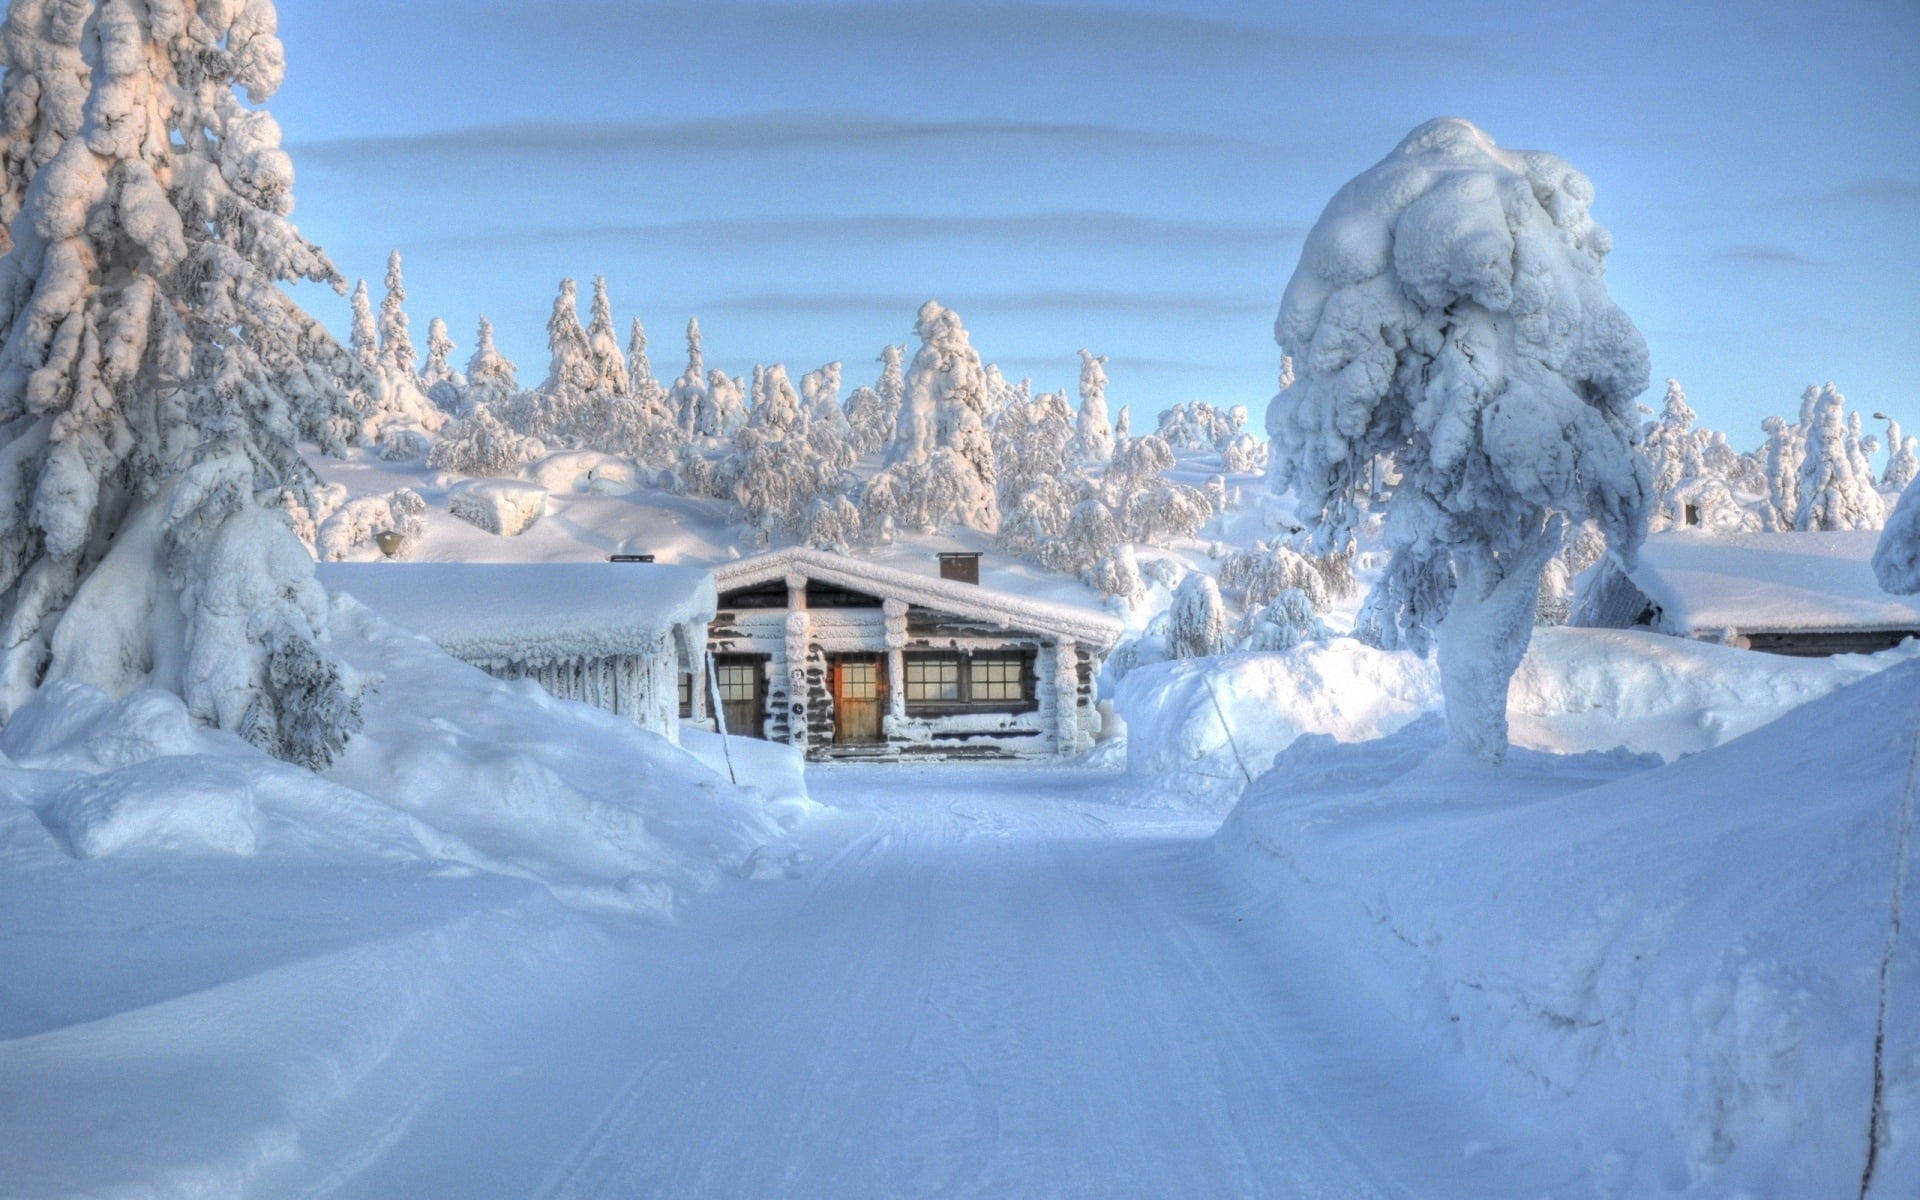 snow covered cabin, wood, snowdrifts, tree, attire, house, winter